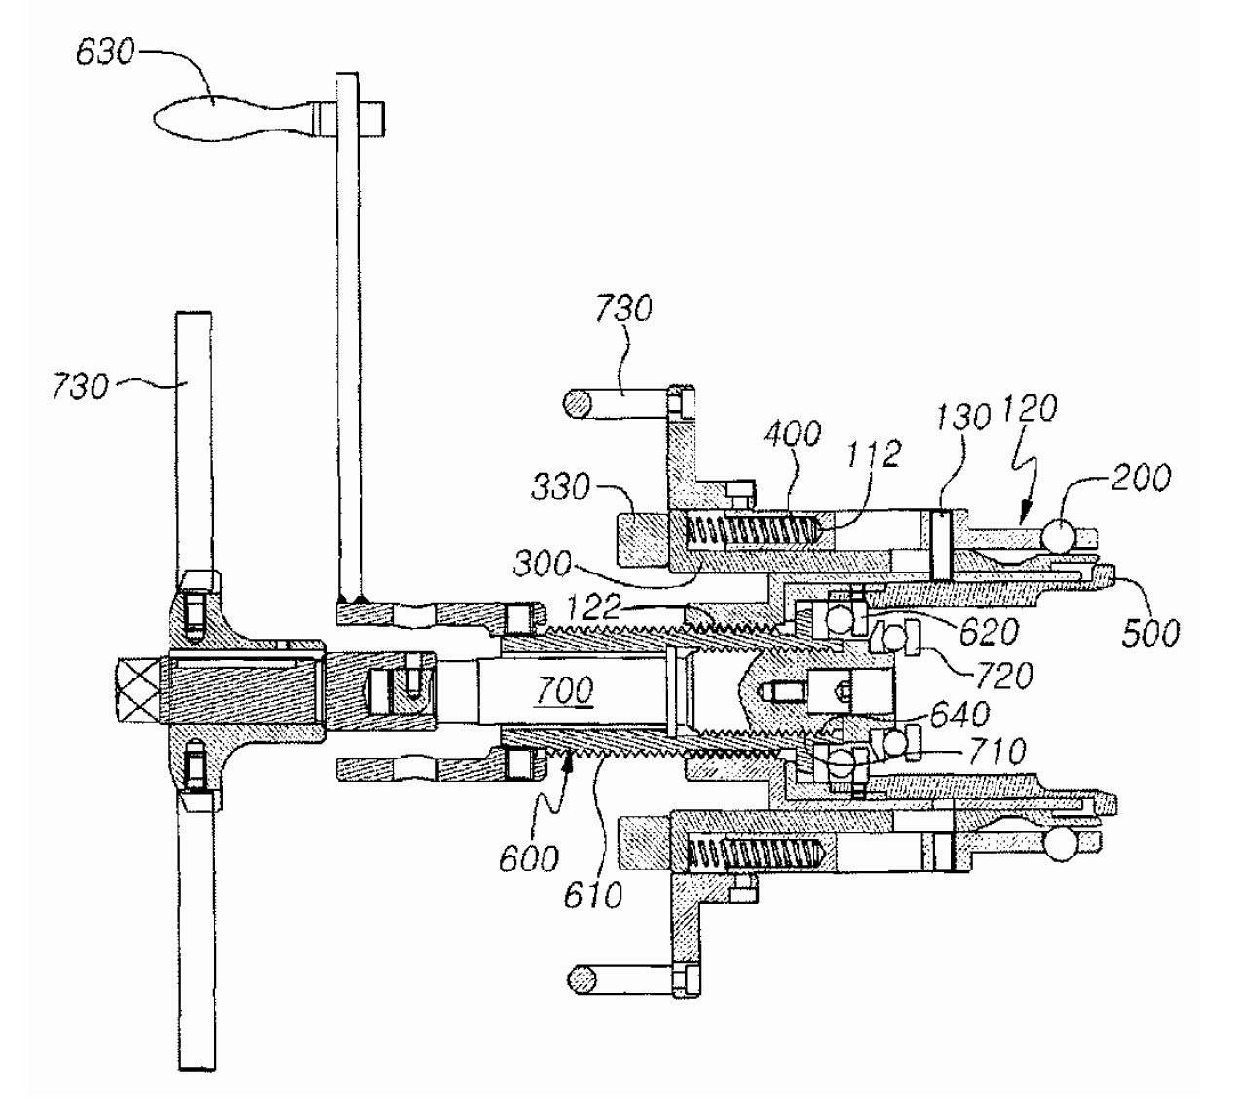 Plug removing device for heavy water reactor fuel system